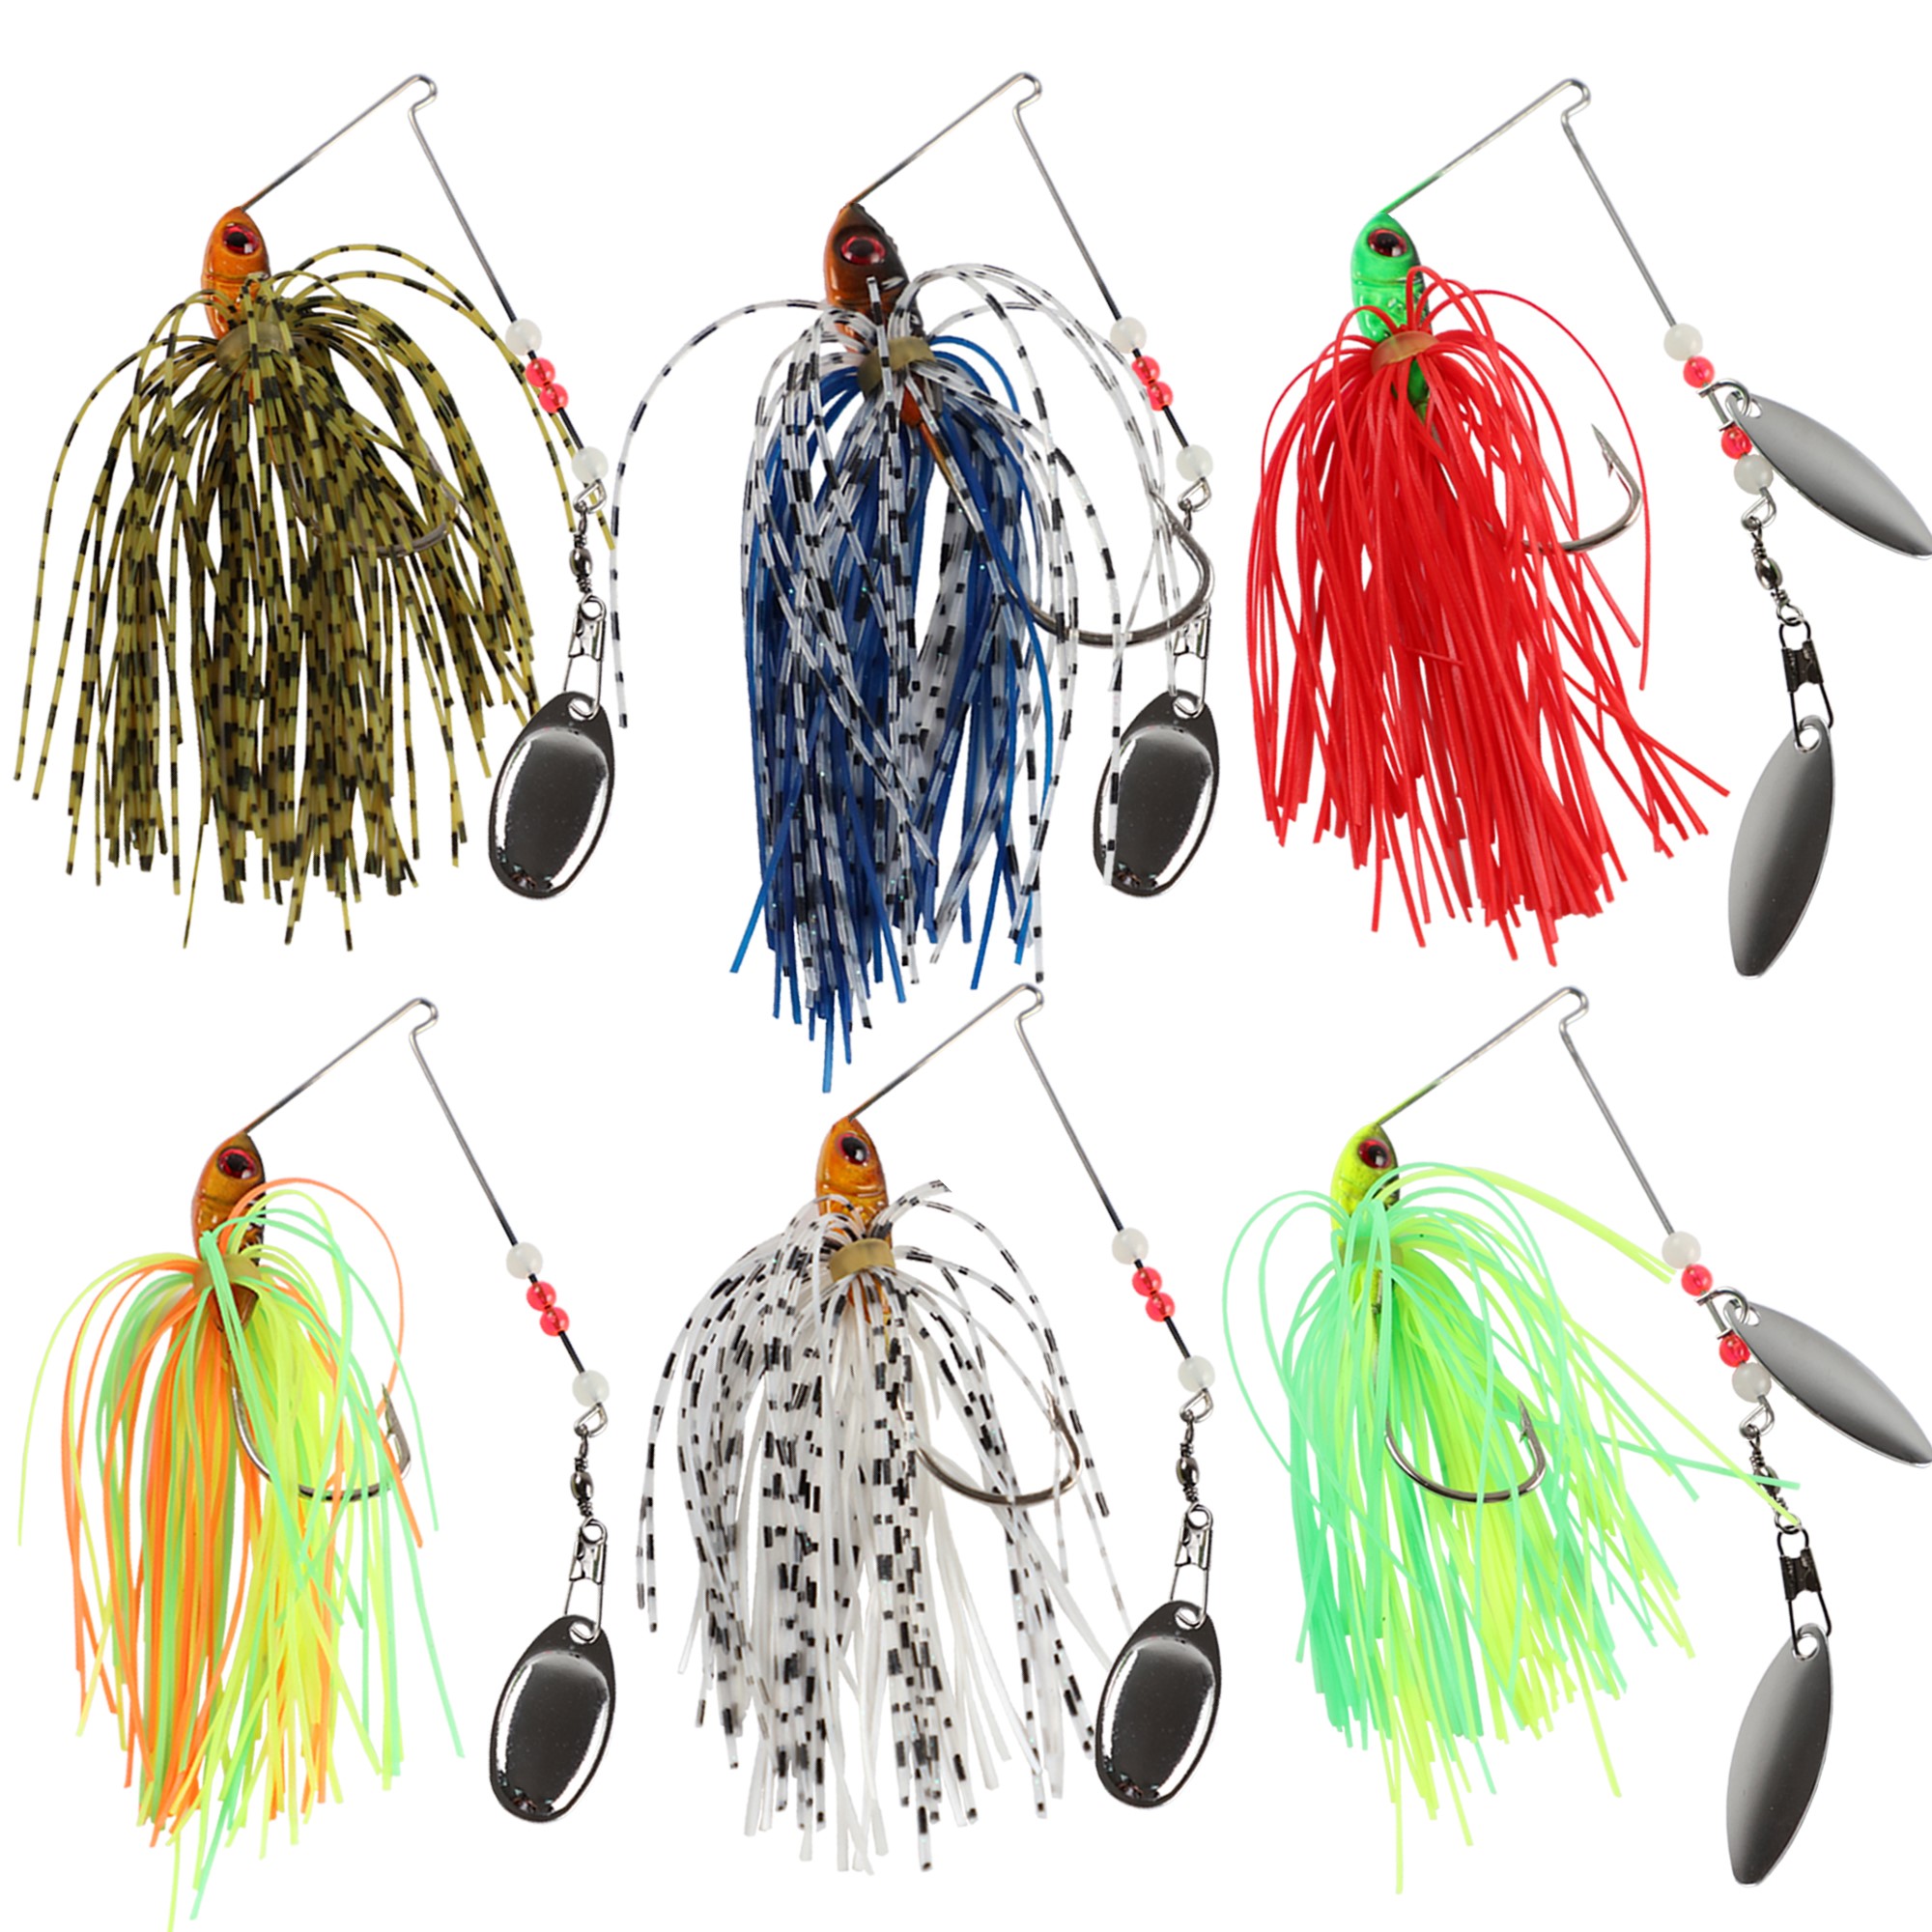 FREE FISHER Fishing Buzzbait 12pcs Spinner Lures 13g/0.46oz with Silicone Skirt Spinnerbait Fishing Tackle Accessories for Pike Bass Pesca